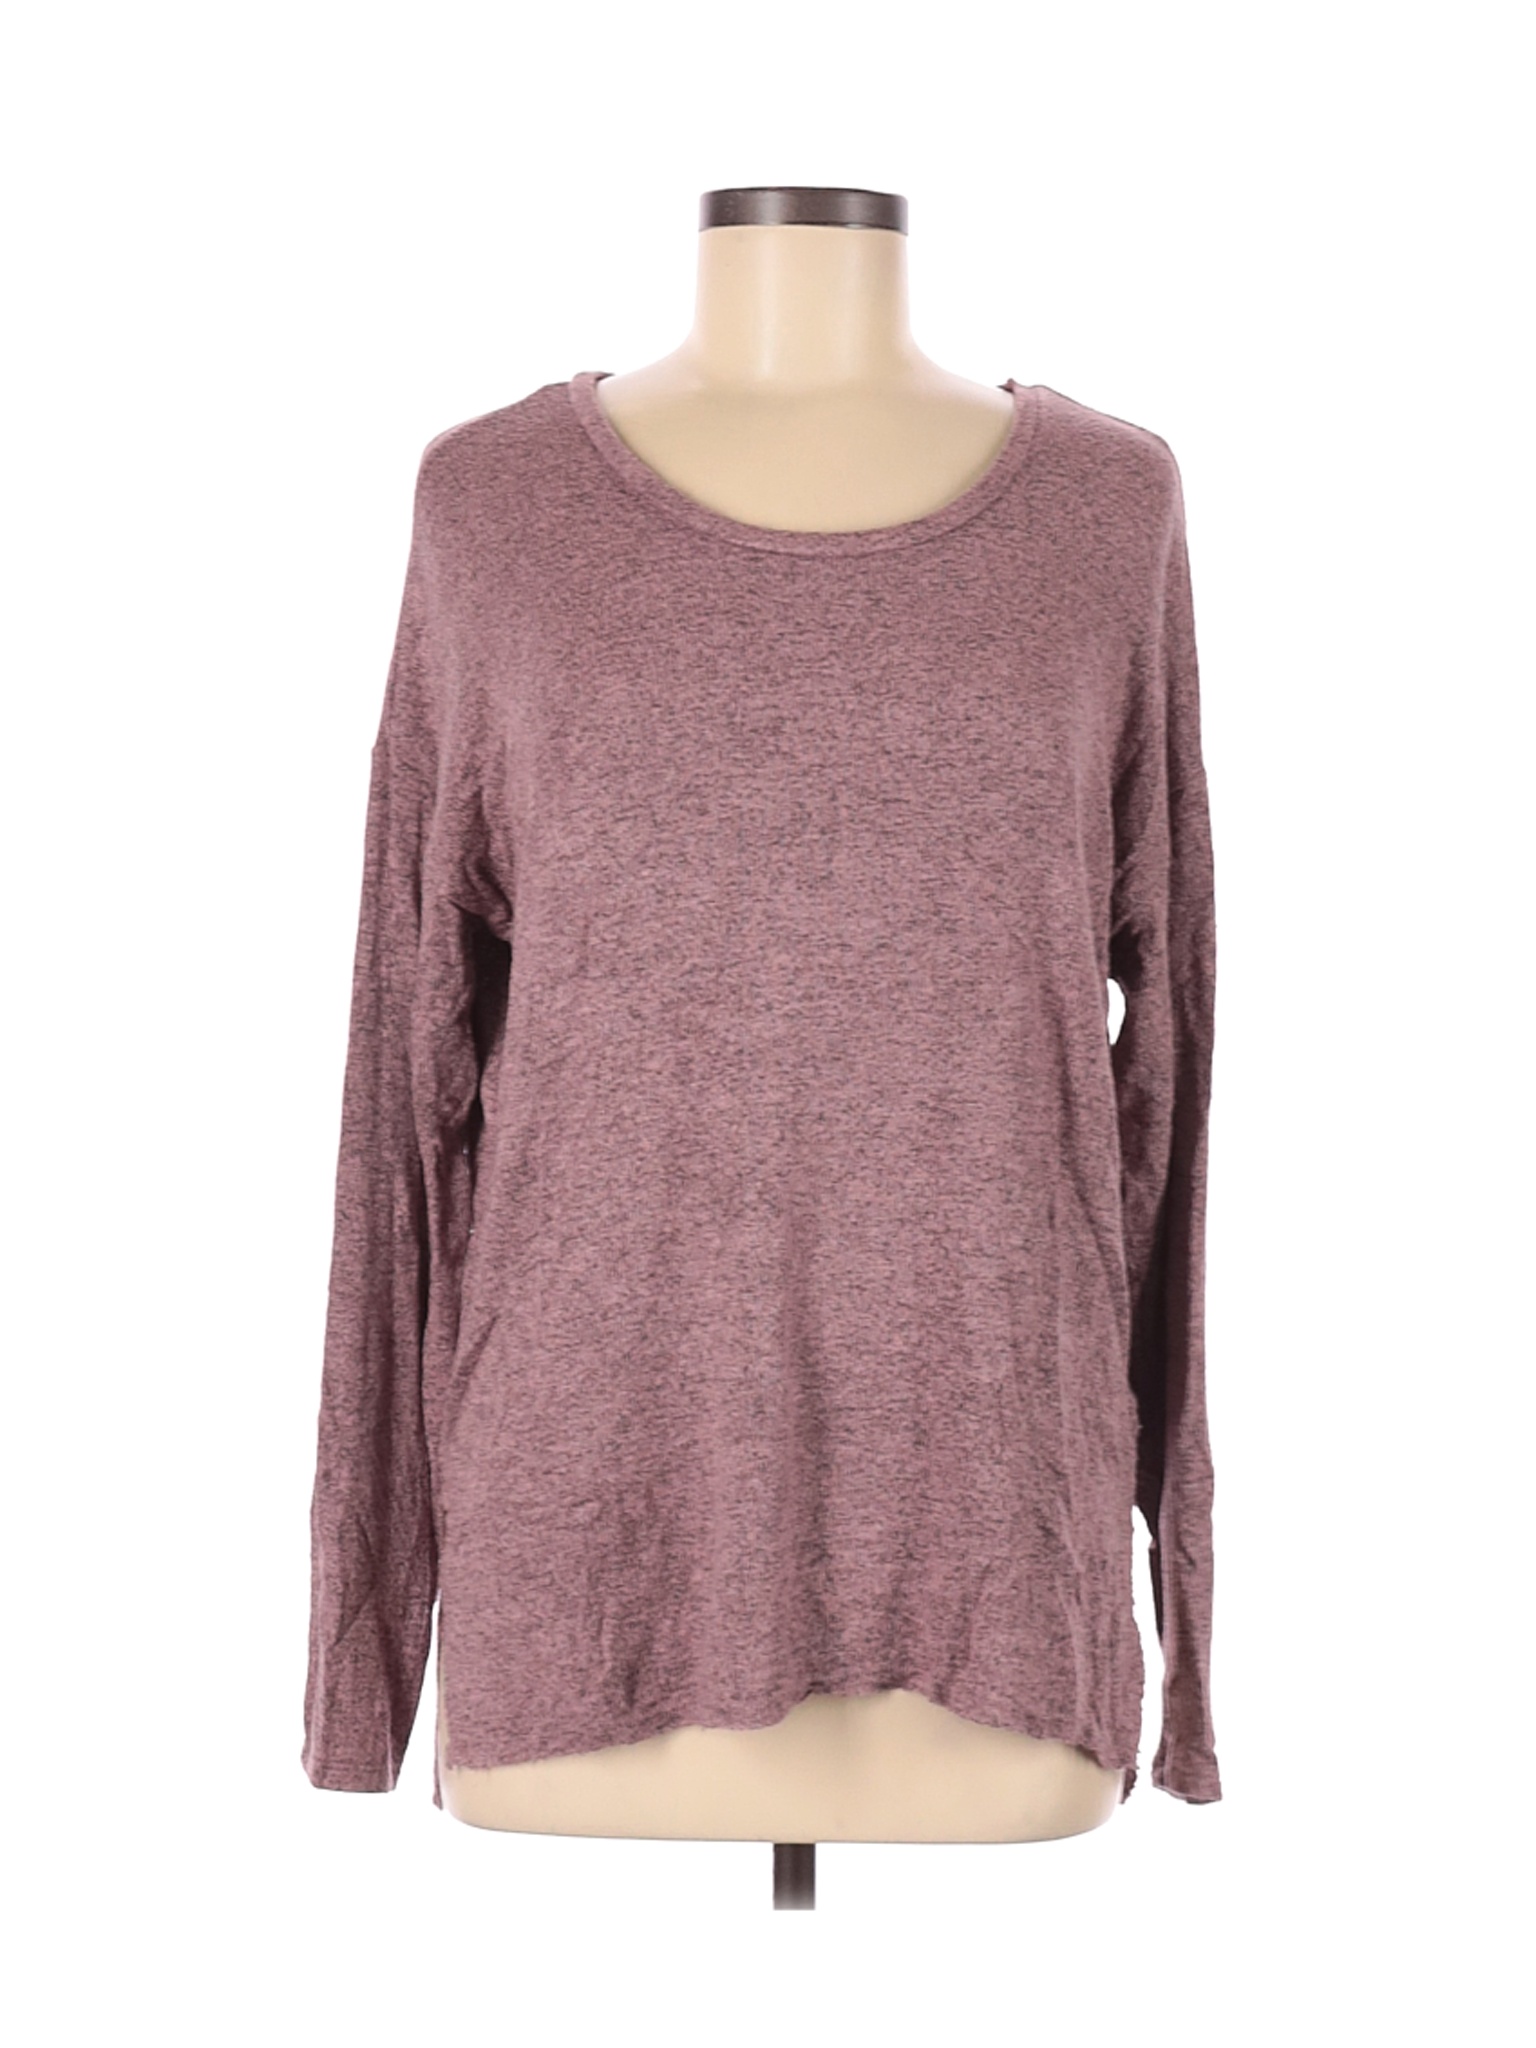 American Eagle Outfitters Women Pink Long Sleeve T-Shirt M | eBay